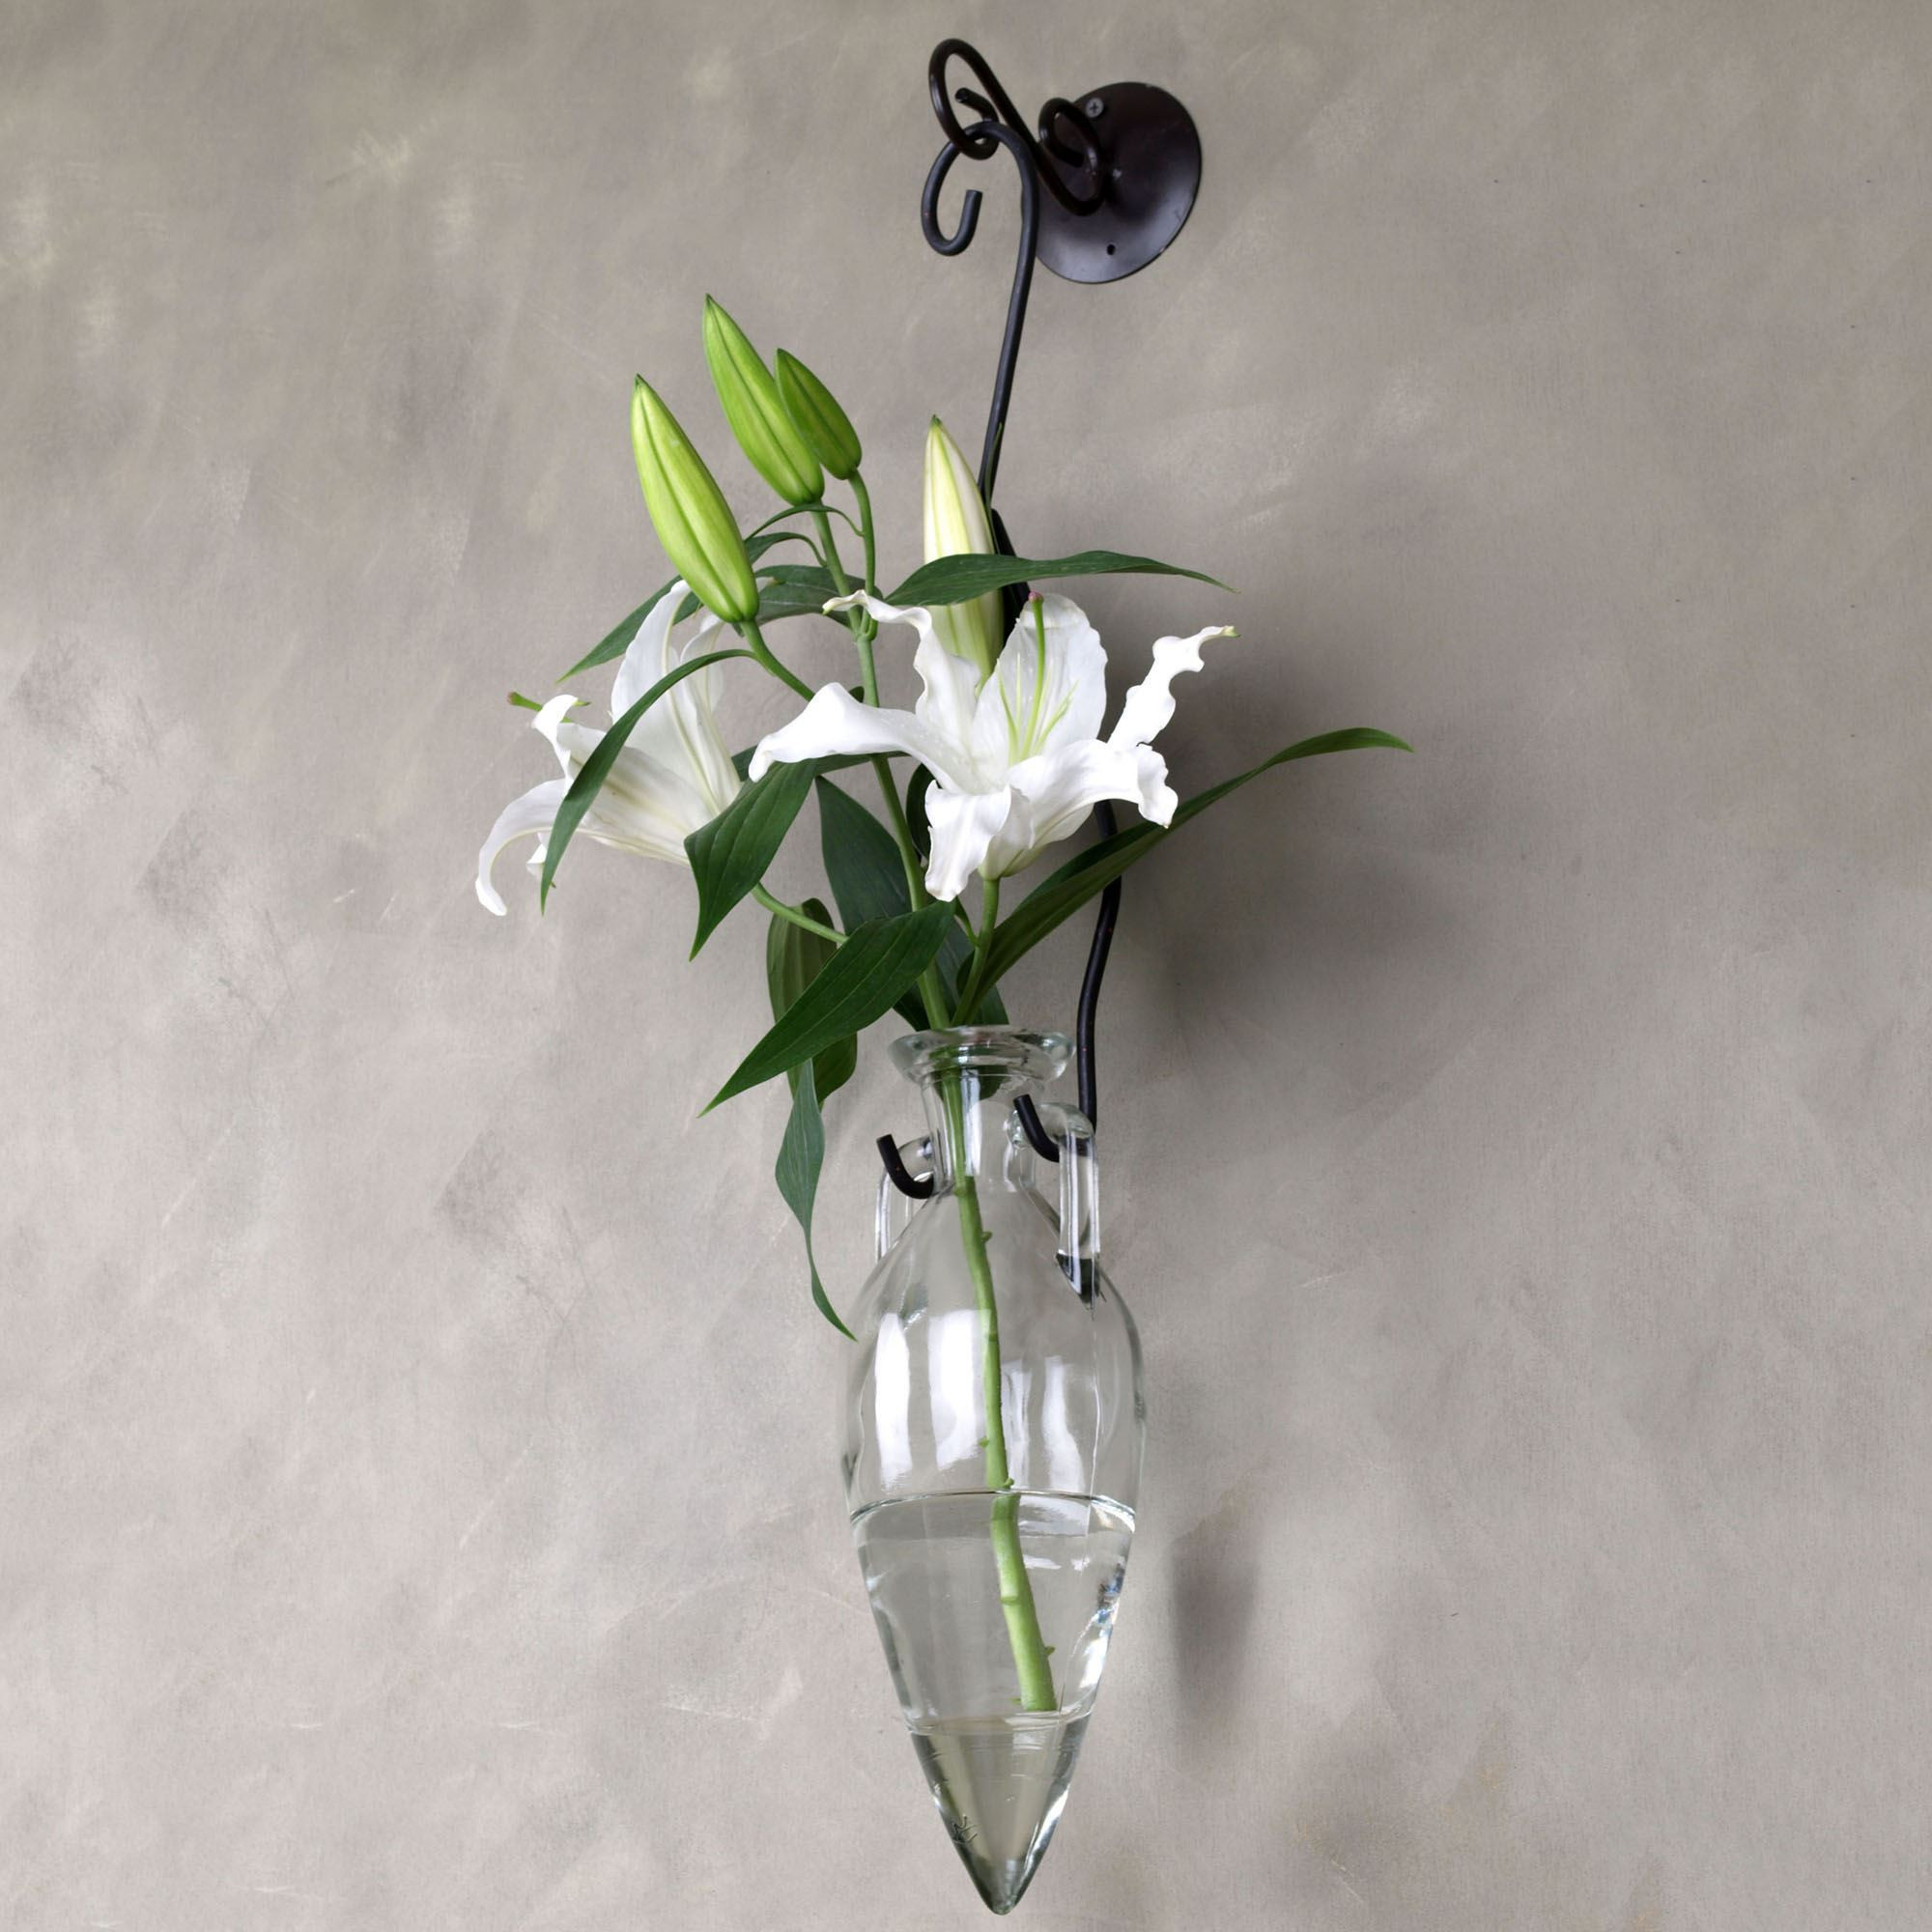 20 Amazing Large Glass Flower Vase 2024 free download large glass flower vase of metal flower vase wall decor wall decor ideas with regard to metal fl wall decor elegant h vases hanging flower vase